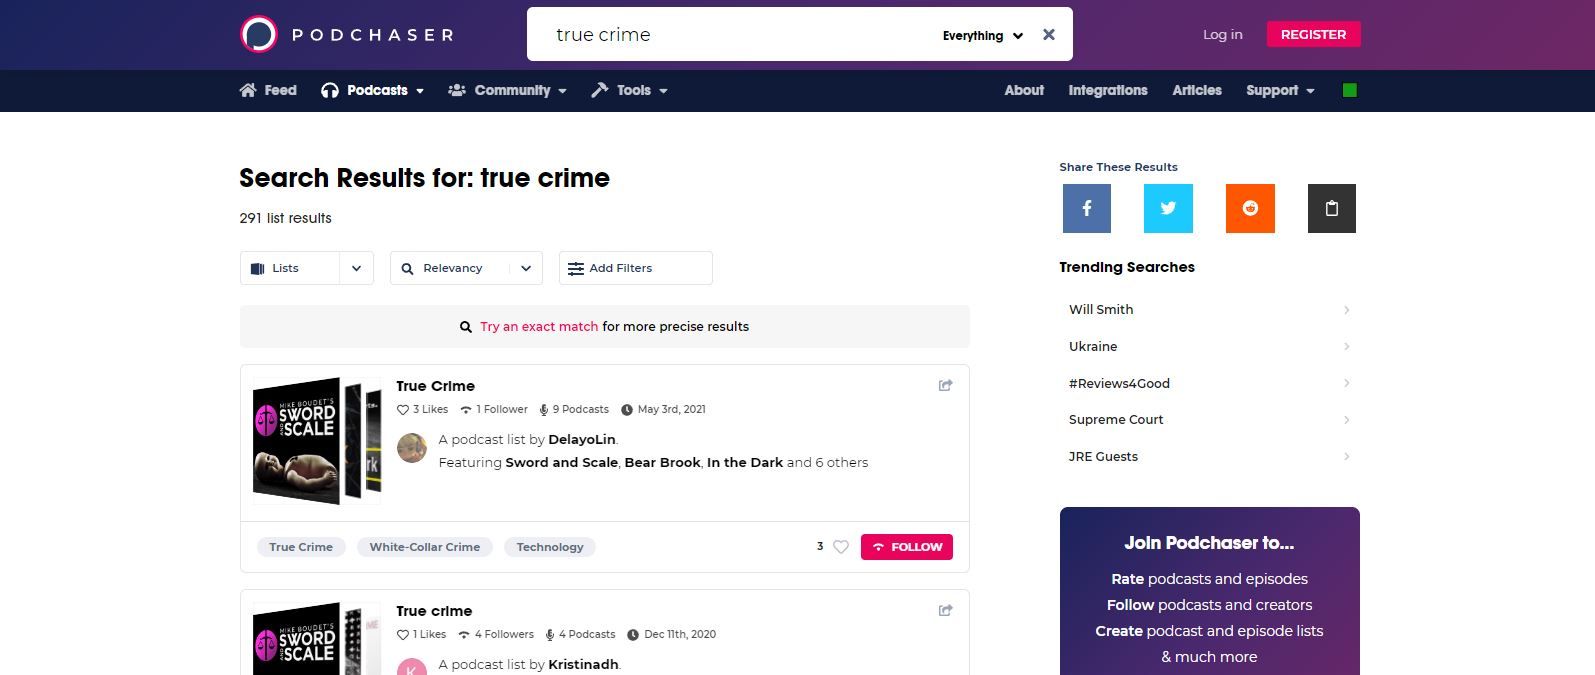 A Screenshot of Podchaser's Search Results for "True Crime"